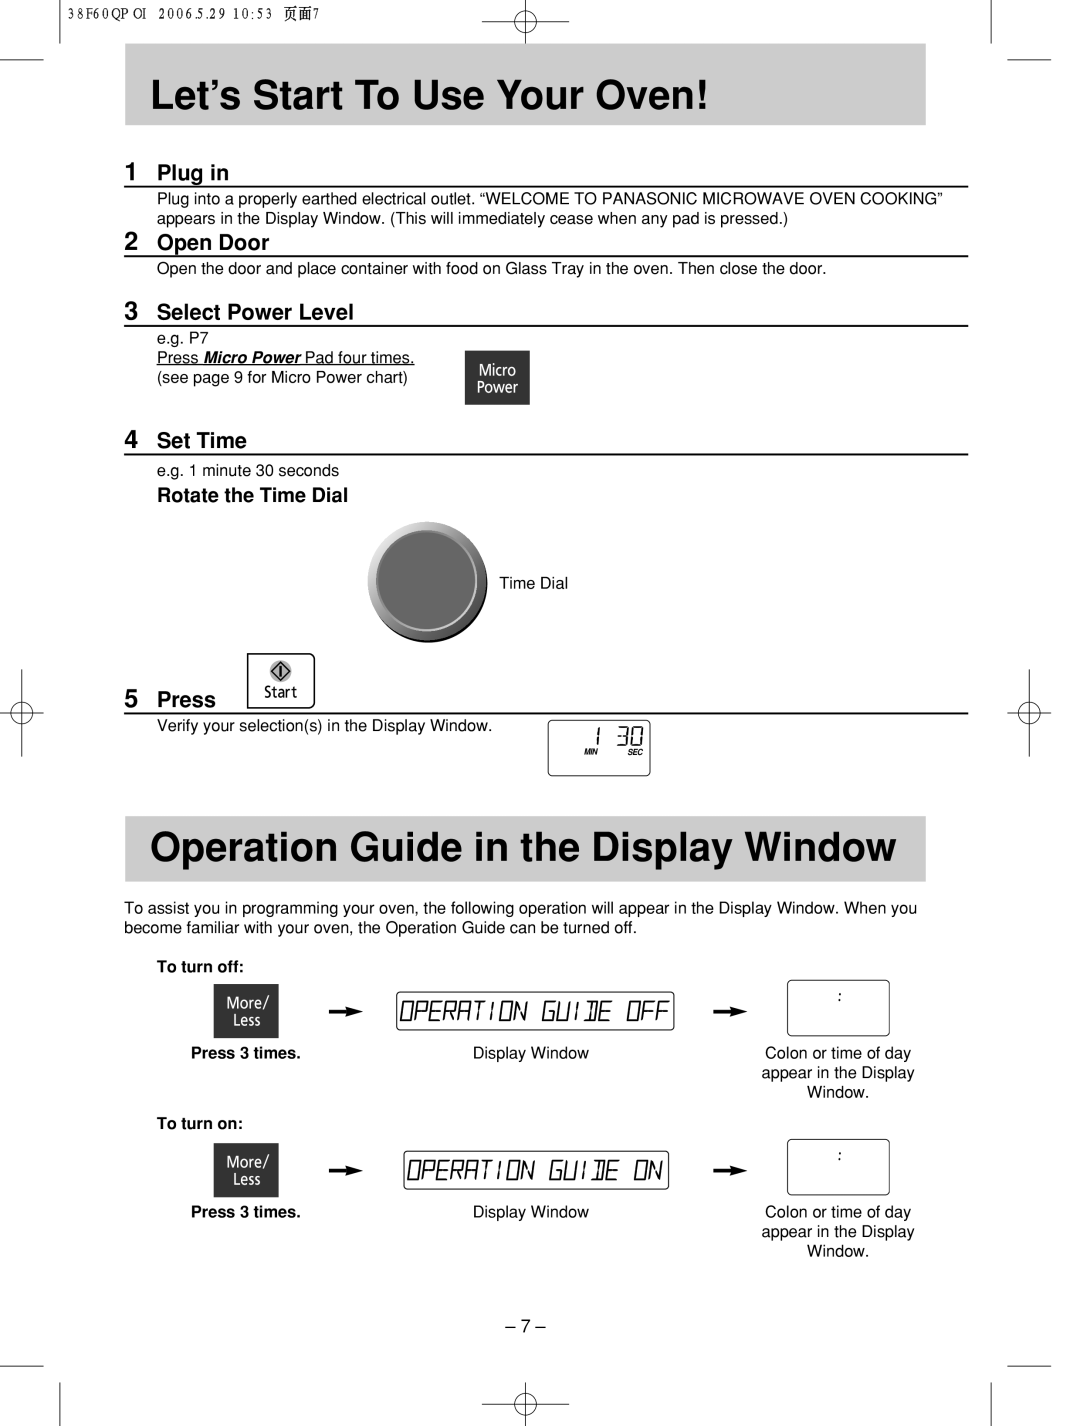 Panasonic nn-sd686s Let’s!!!!! Start! To Use Your Oven, Operation Guide in the Display Window, Plug in, Open Door, Press 